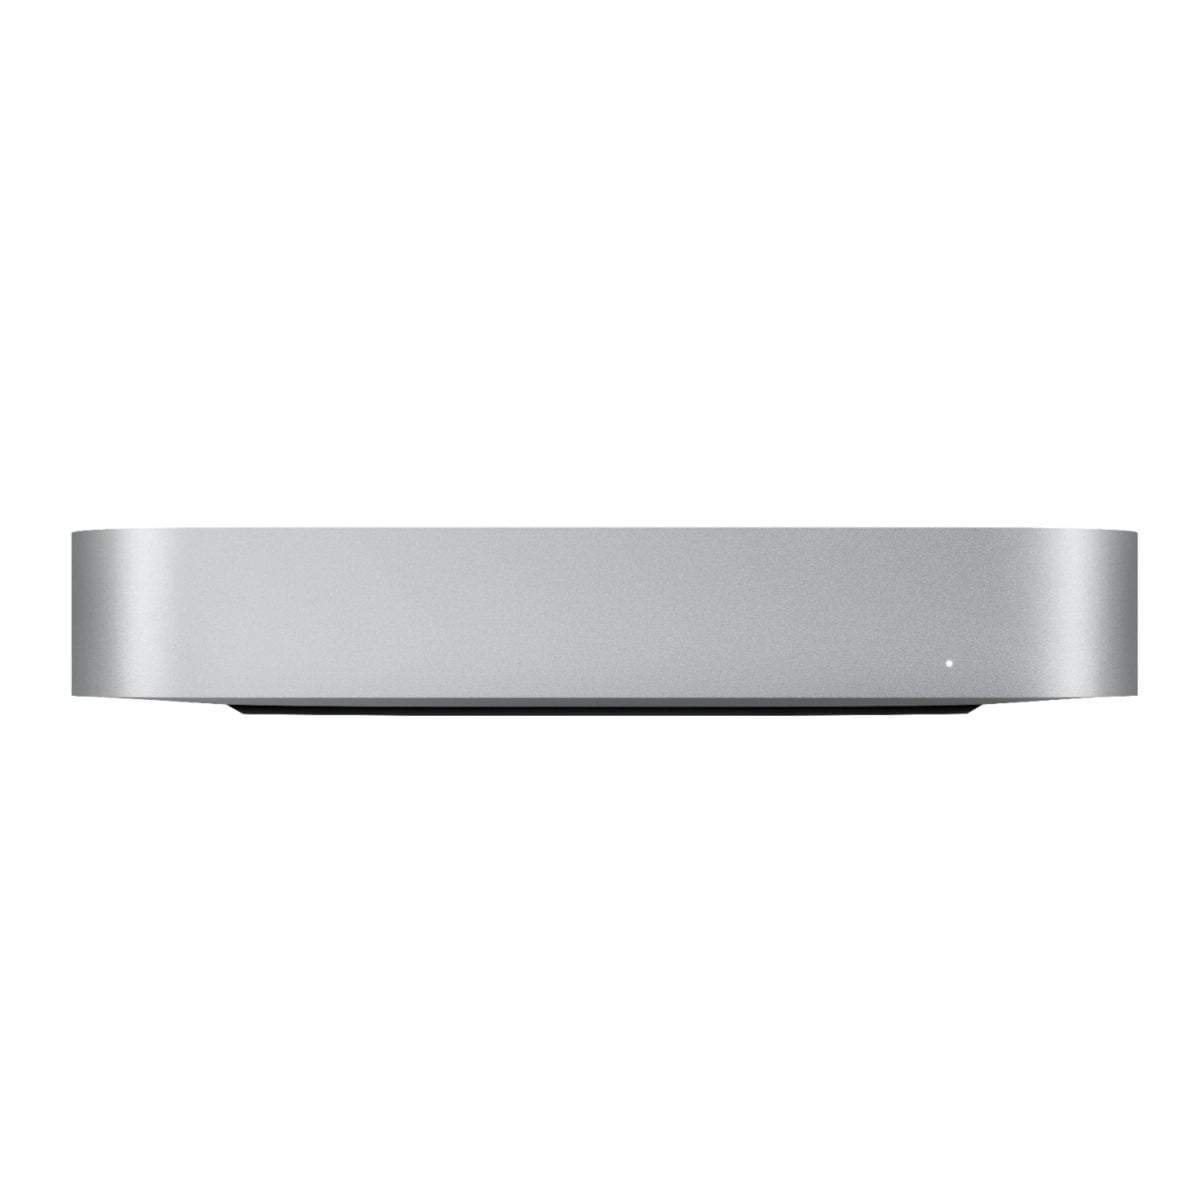 6427497Cv12D Scaled Apple &Lt;H1 Class=&Quot;Heading-5 V-Fw-Regular&Quot;&Gt;Mac Mini Desktop - Apple M1 Chip - 8Gb Memory - 256Gb Ssd (Latest Model) - Silver&Lt;/H1&Gt; Https://Www.youtube.com/Watch?V=3Oq__Scnyna Mac Mini, The Most Versatile, Do-It-All Mac Desktop, To A Whole New Level Of Performance. With Up To 3X Faster Cpu Performance, Up To 6X Faster Graphics, A Powerful Neural Engine With Up To 15X Faster Machine Learning, And Superfast Unified Memory — All In An Ultracompact Design.* So You Can Create, Work, And Play On Mac Mini With Speed And Power Beyond Anything You Ever Imagined.. Mac Mini Mac Mini Desktop - Apple M1 Chip - 8Gb Memory - 512Gb Ssd (Latest Model) - Silver